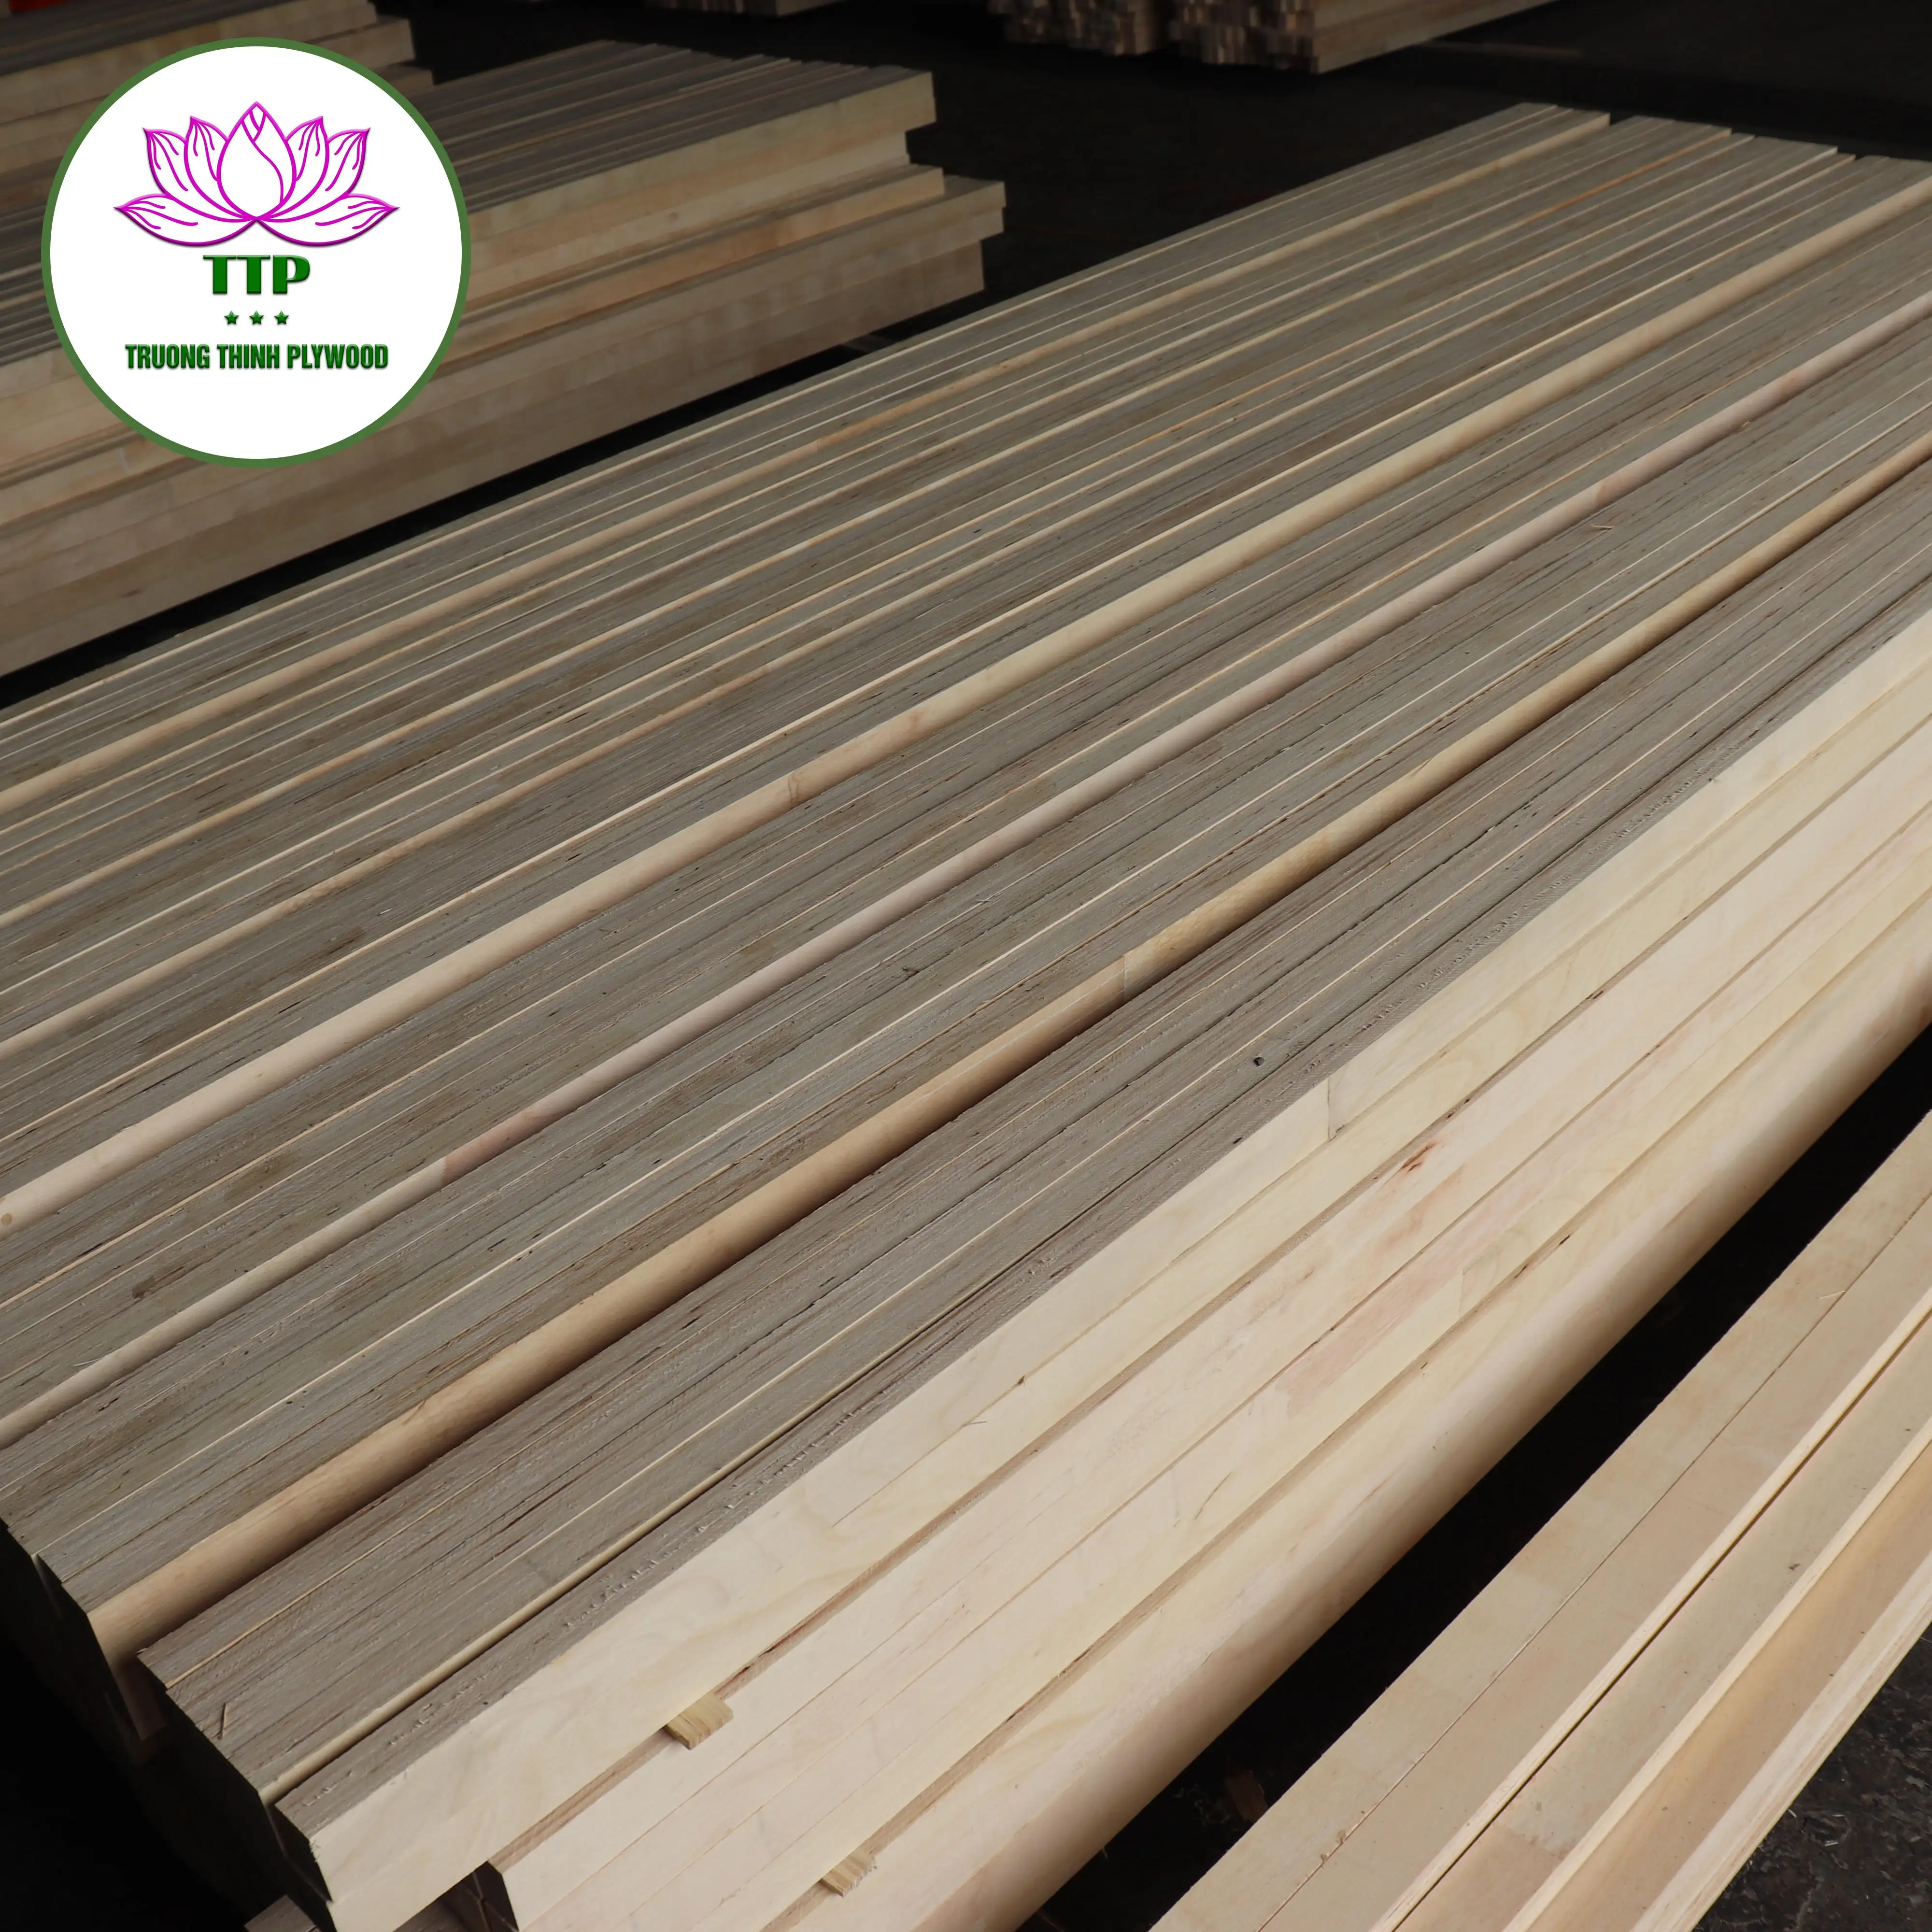 HOT DEAL Hot sale Pine Poplar Core Laminated Veneer LVL For Pallet Construction Packaging Box Door Frame Bed Slats Any Sizes